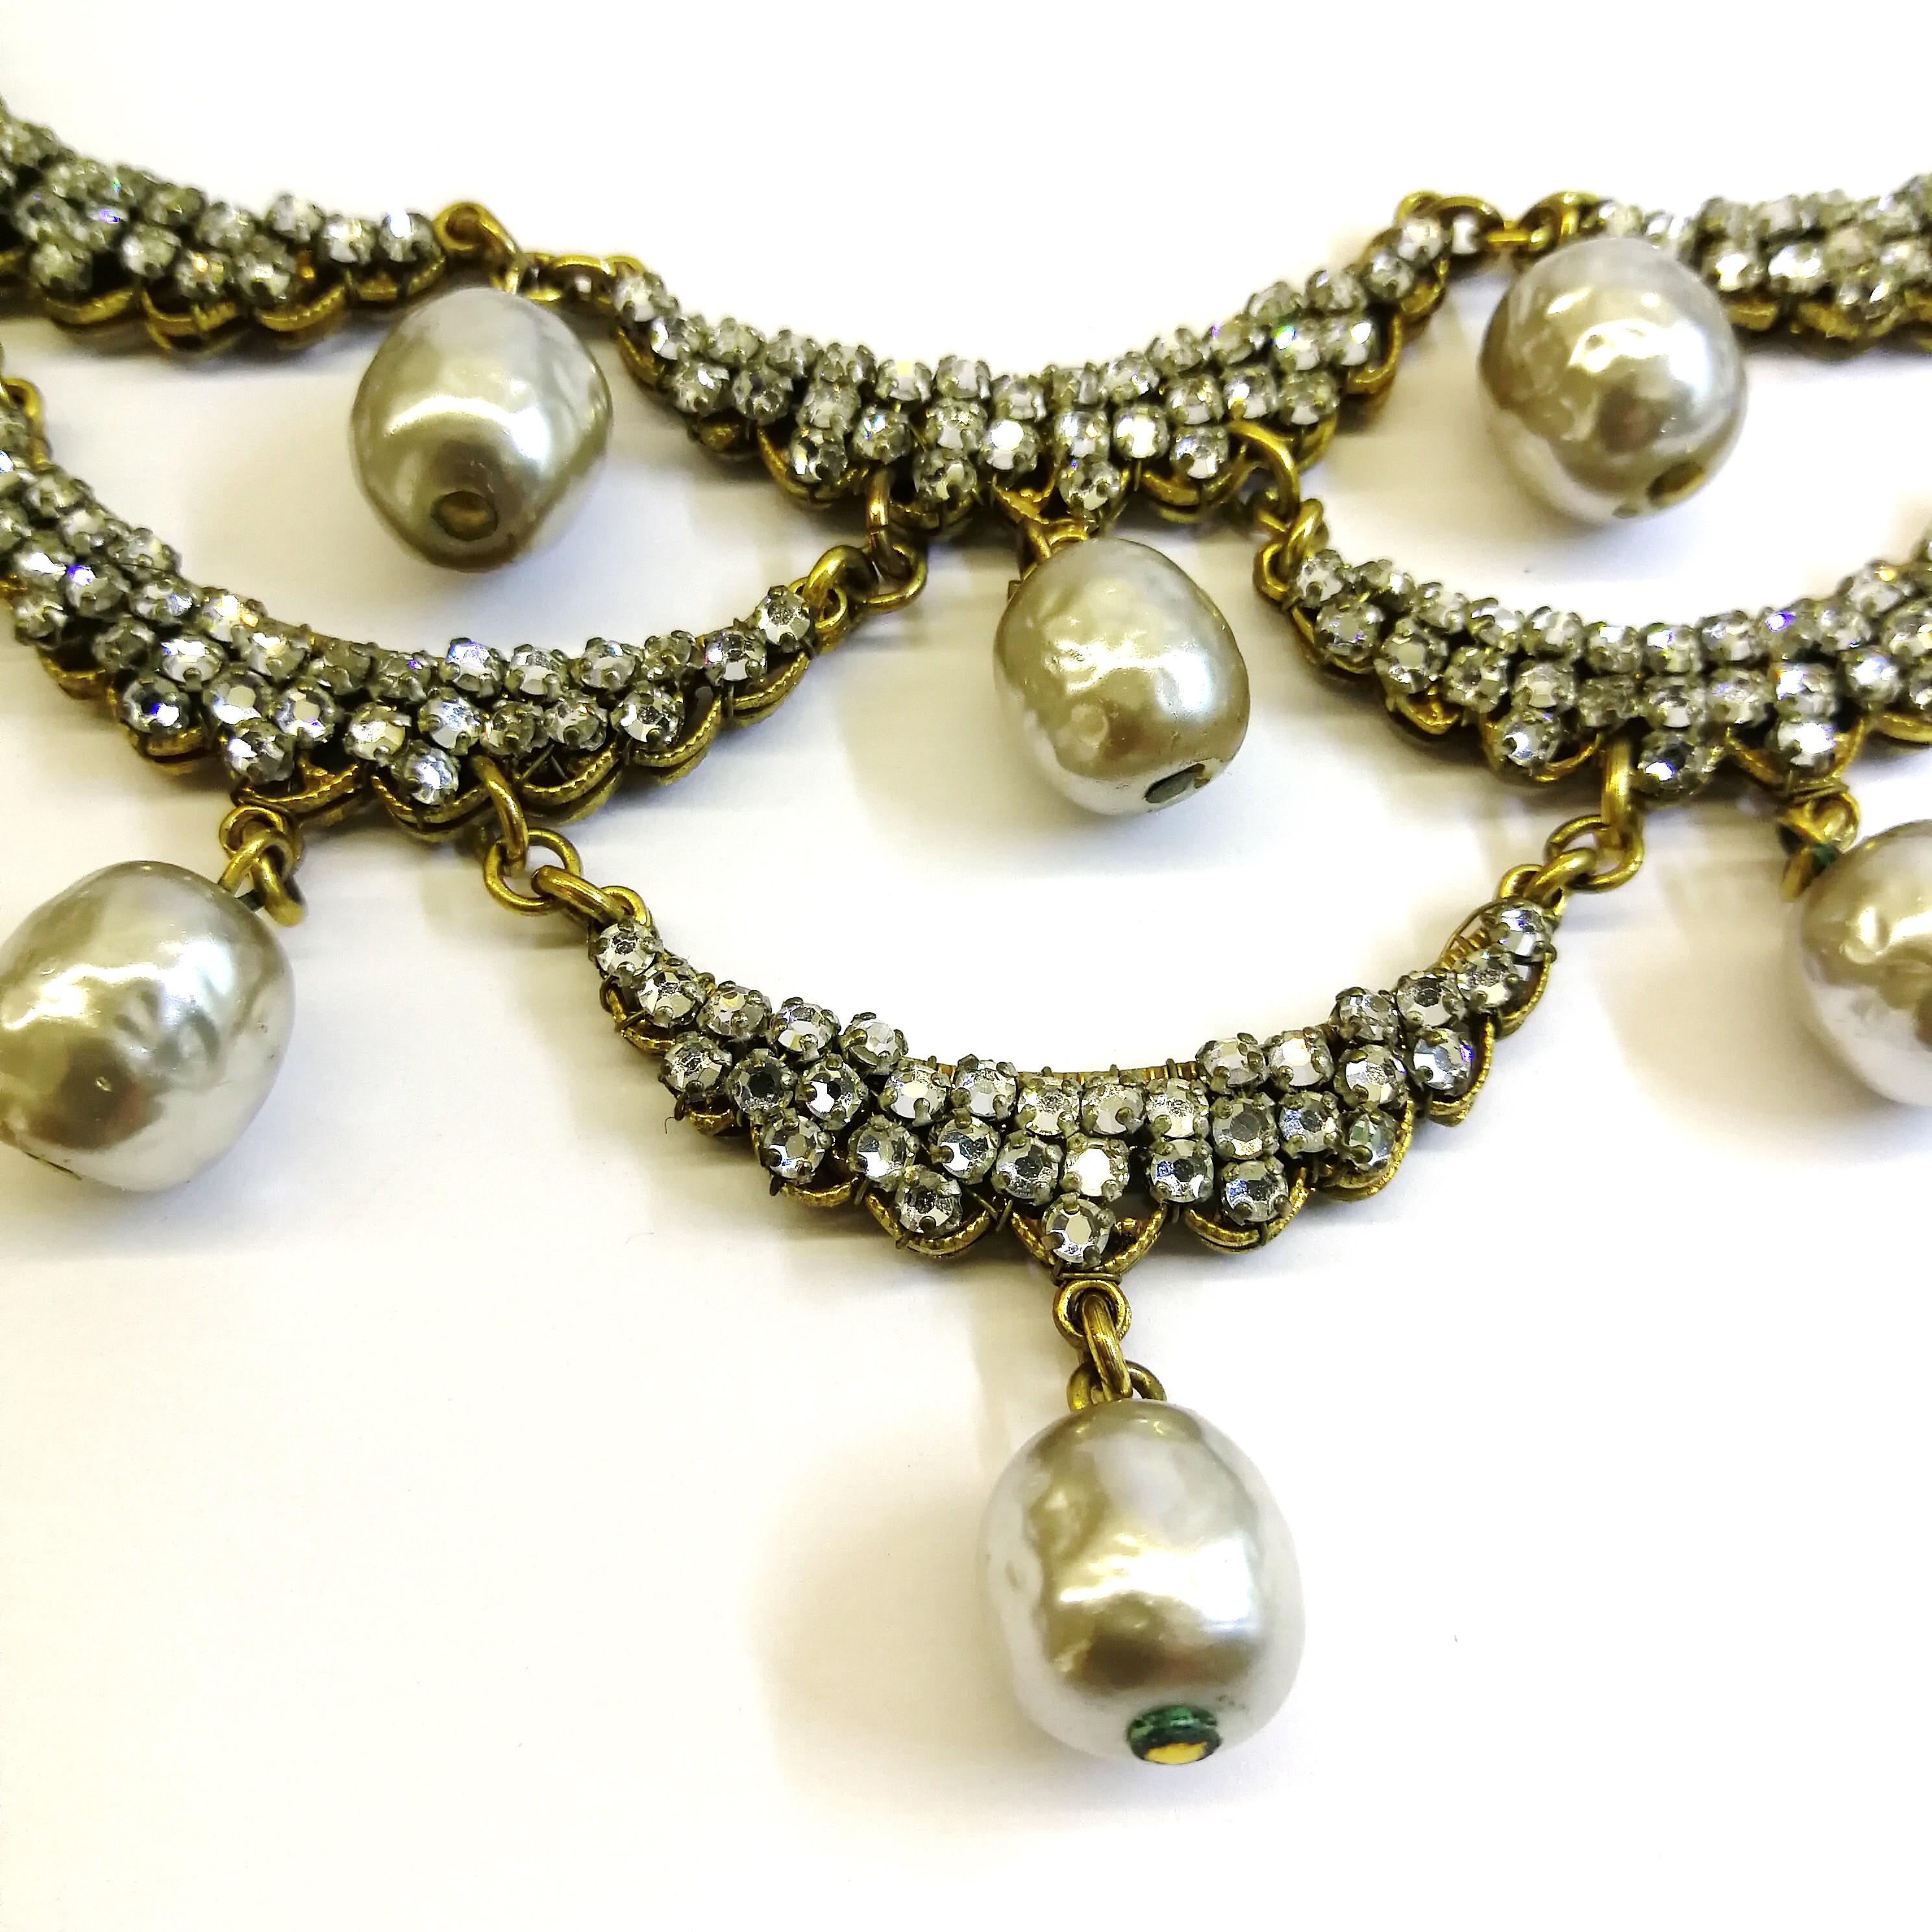 A necklace and earrings of gilded metal, paste and baroque pearl, Miriam Haskell 1